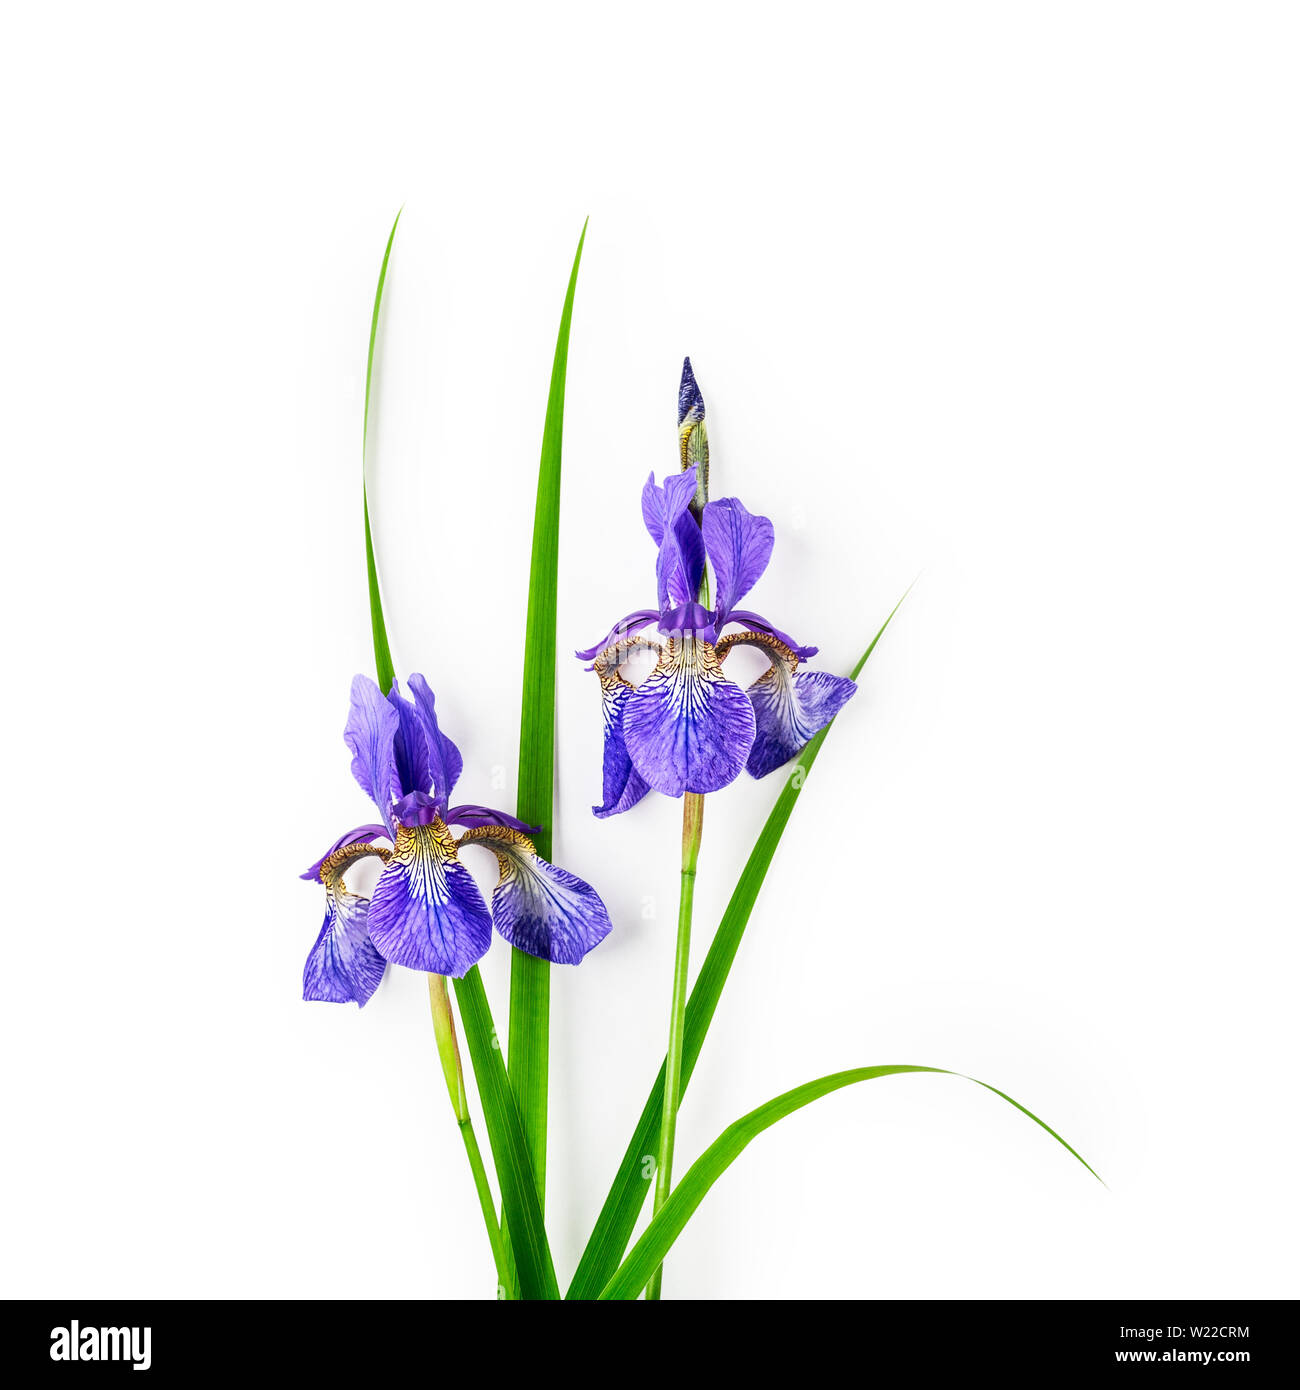 Blue violet iris flower branch with flowers, leaves and stem in ...